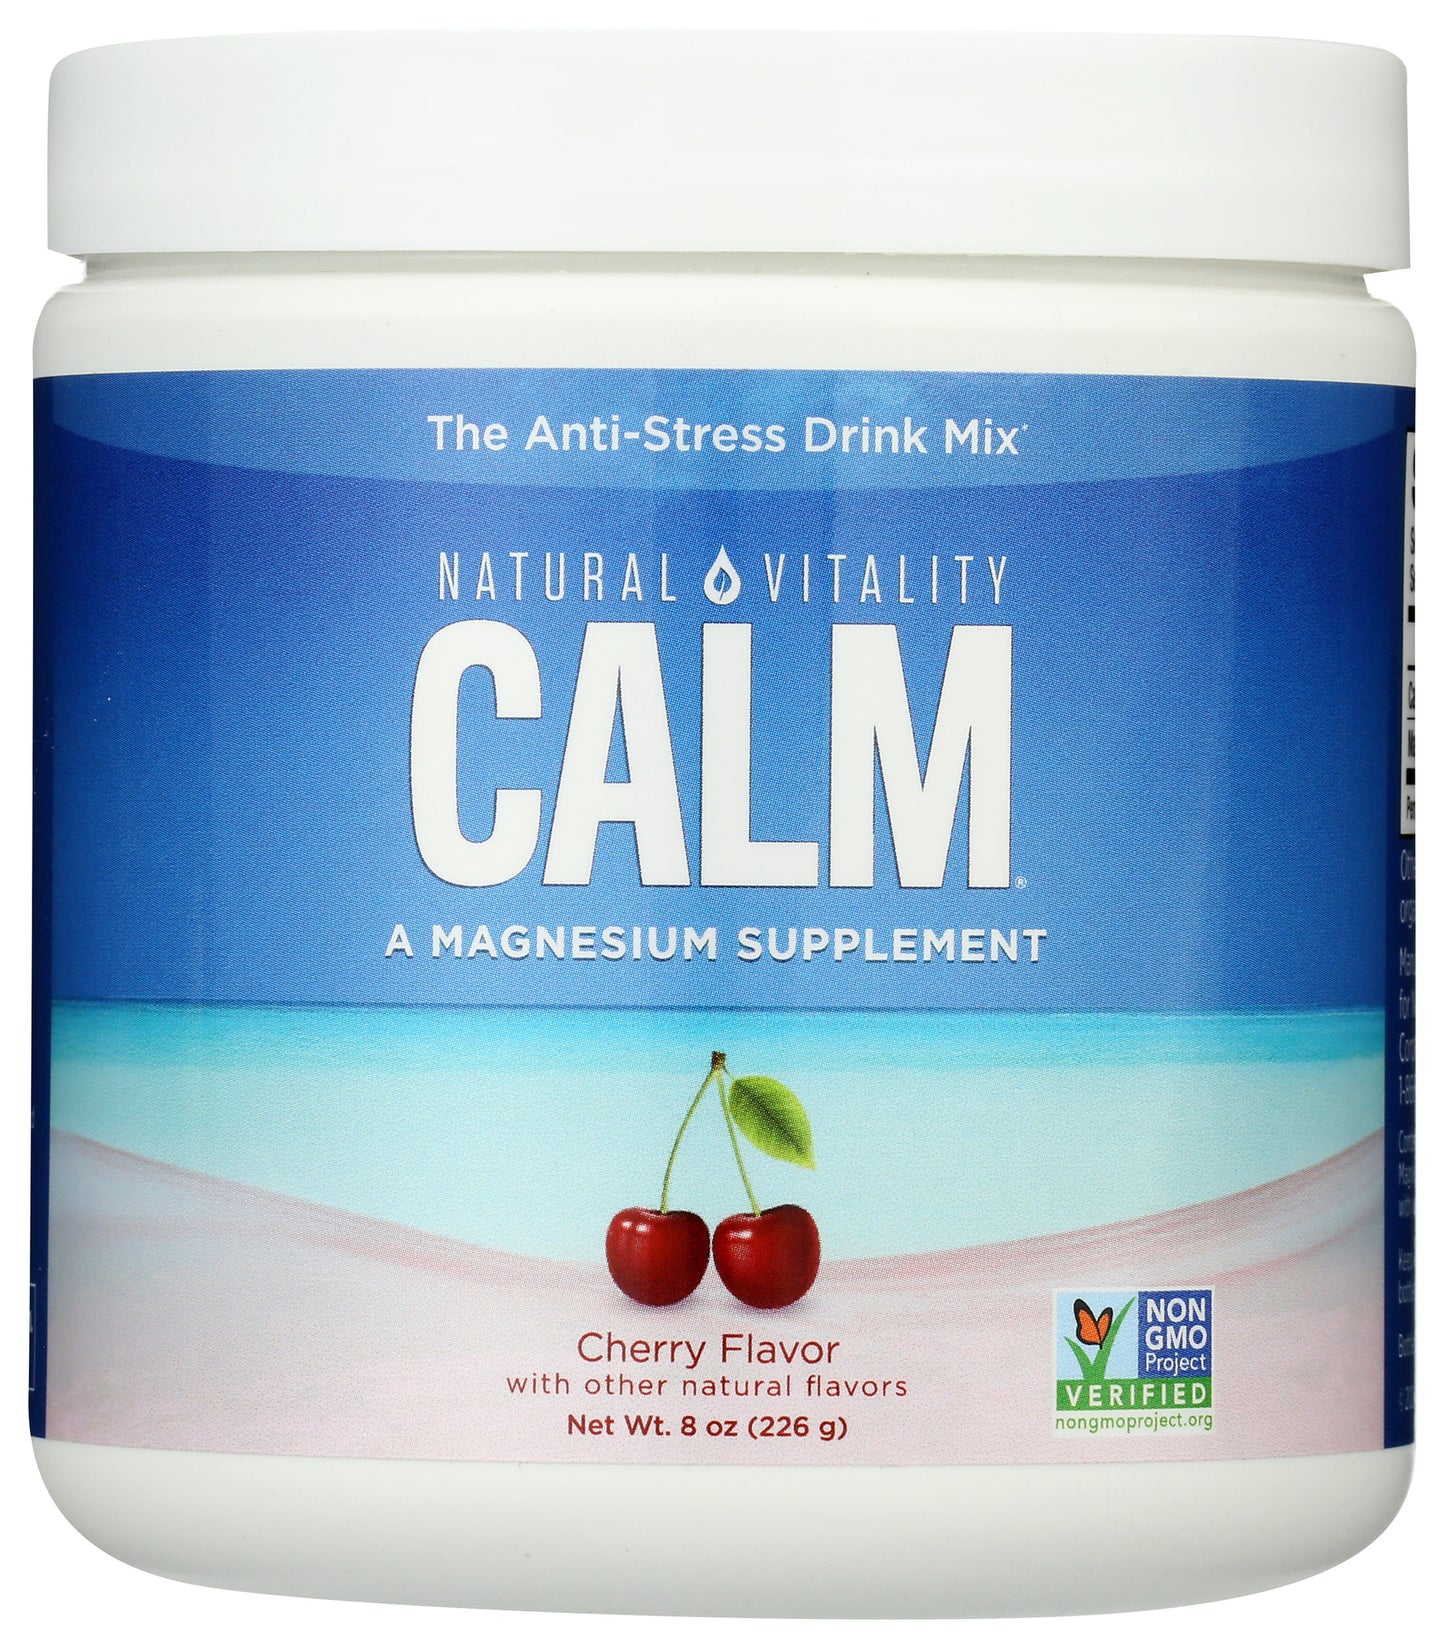 Natural Vitality Calm Magnesium Supplement Cherry Flavor 8oz Front of Bottle